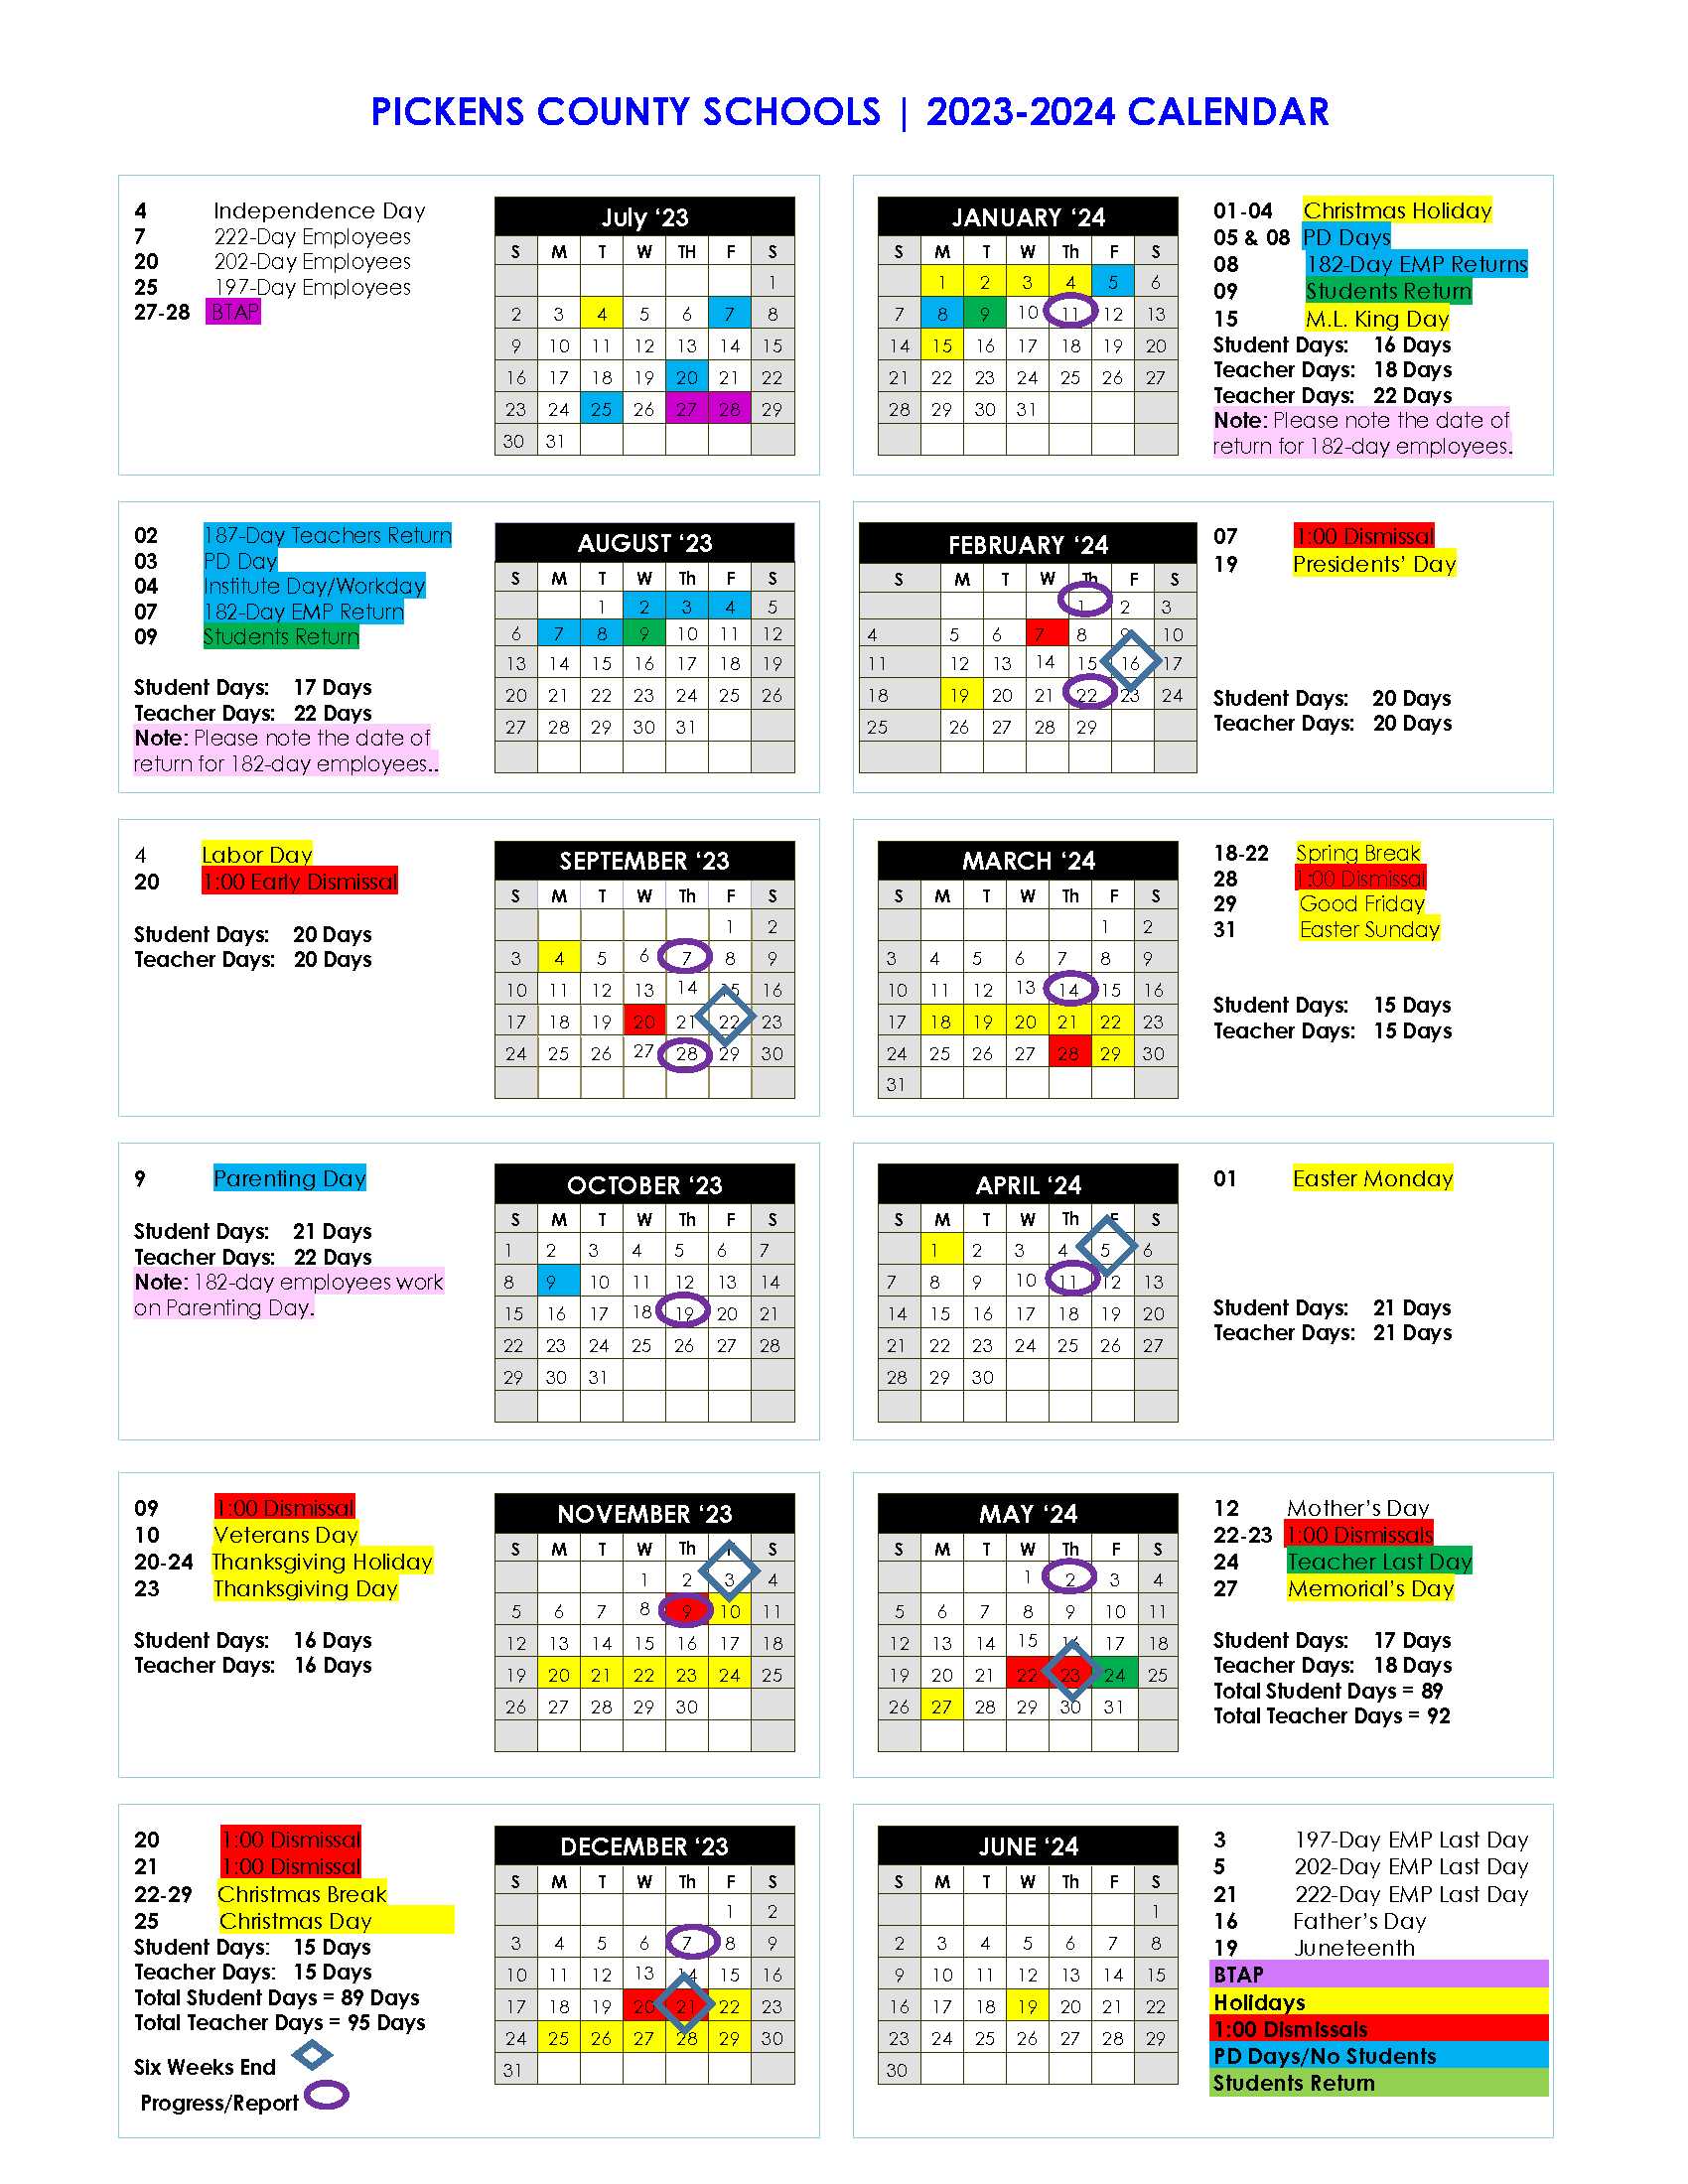 Pickens County Schools Calendar 2023-2024 APPROVED 3.10.2023 Version 1